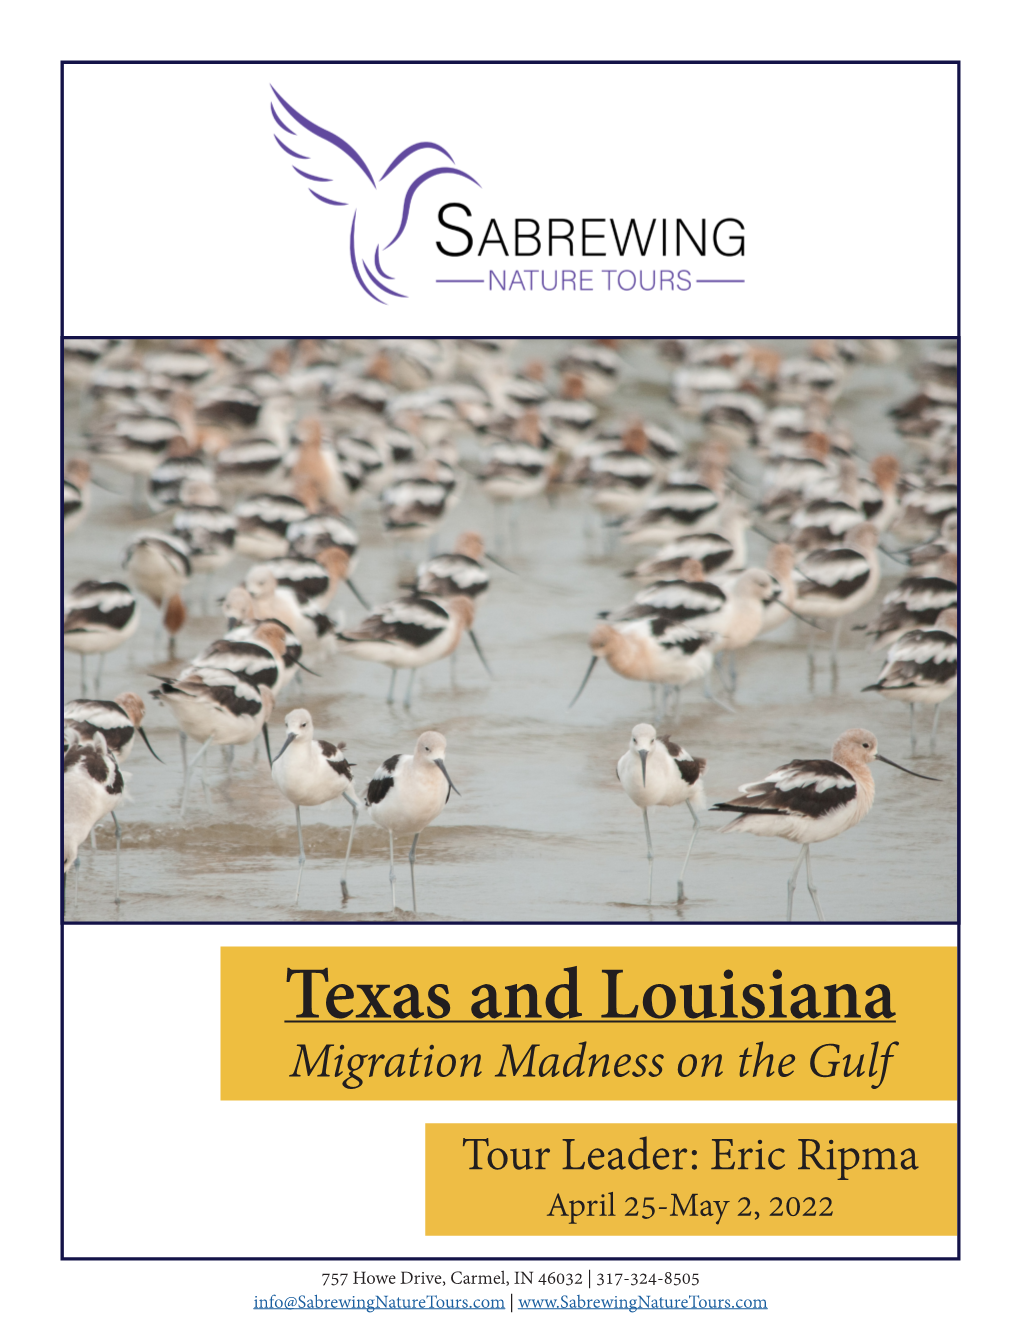 Texas and Louisiana Migration Madness on the Gulf Tour Leader: Eric Ripma April 25-May 2, 2022